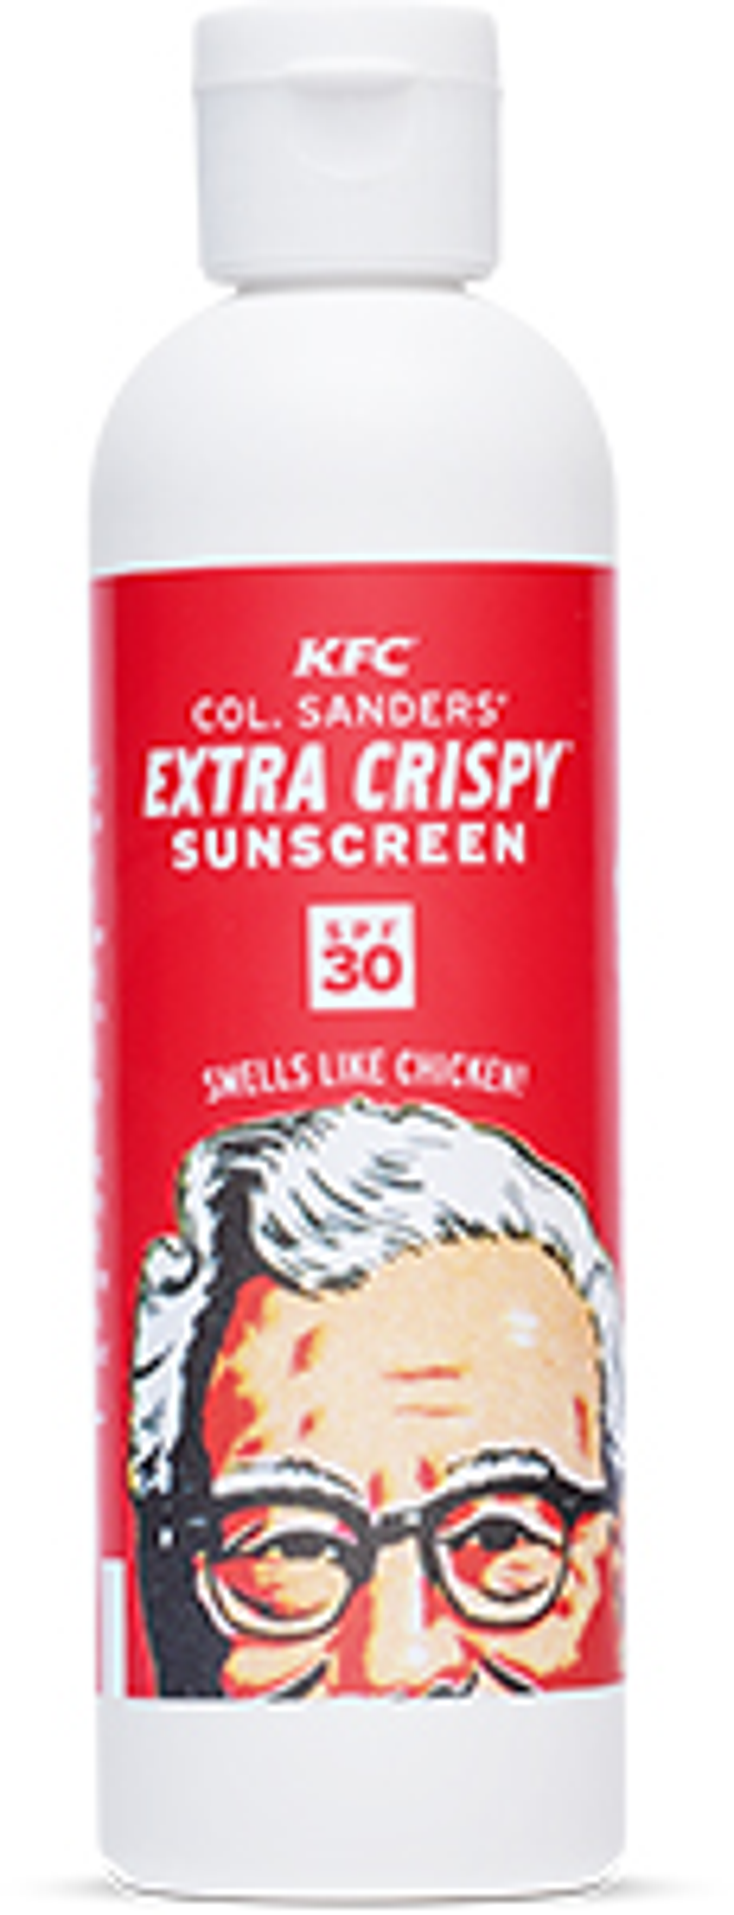 KFC Cooks Up Scented Sunscreen